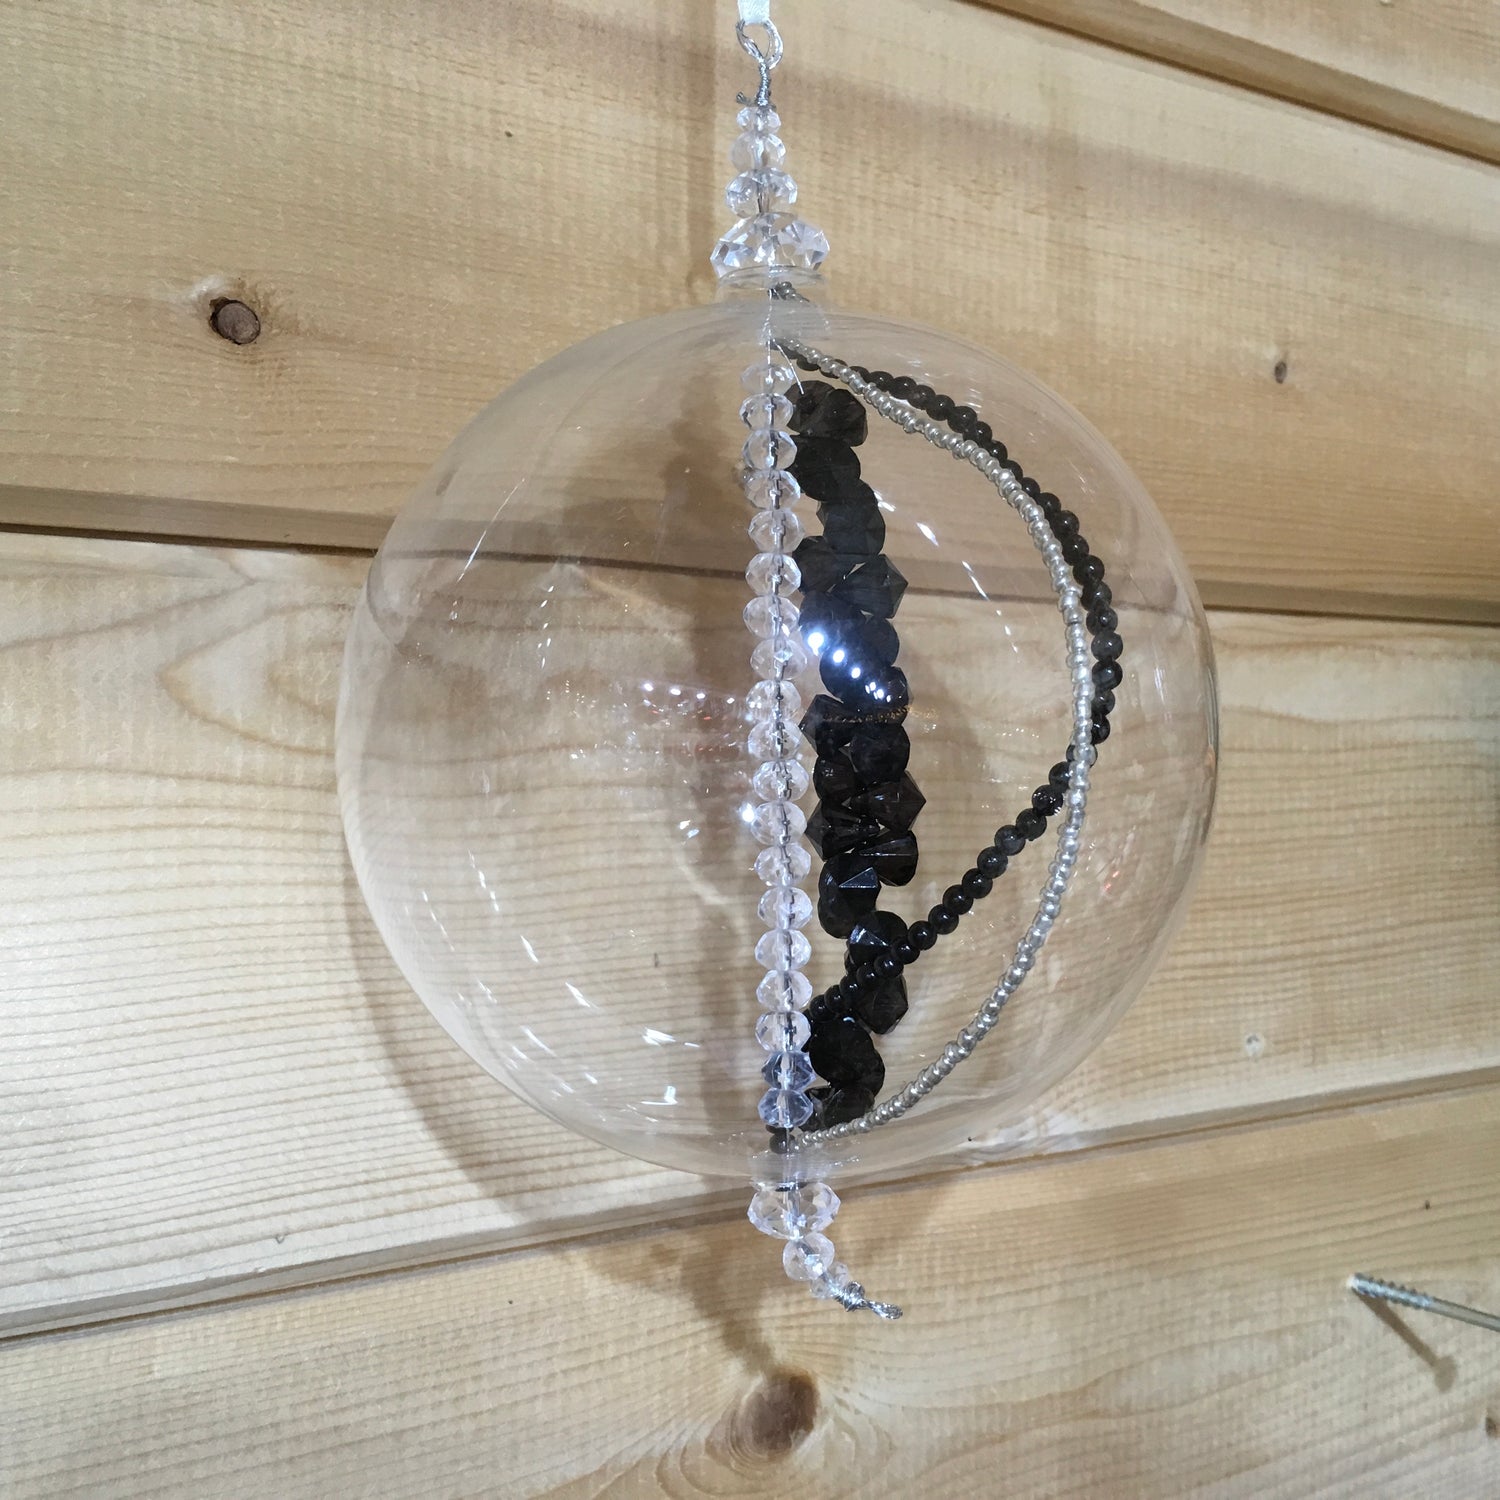 Handmade blown glass sphere filled with strings of black, clear and silver beads